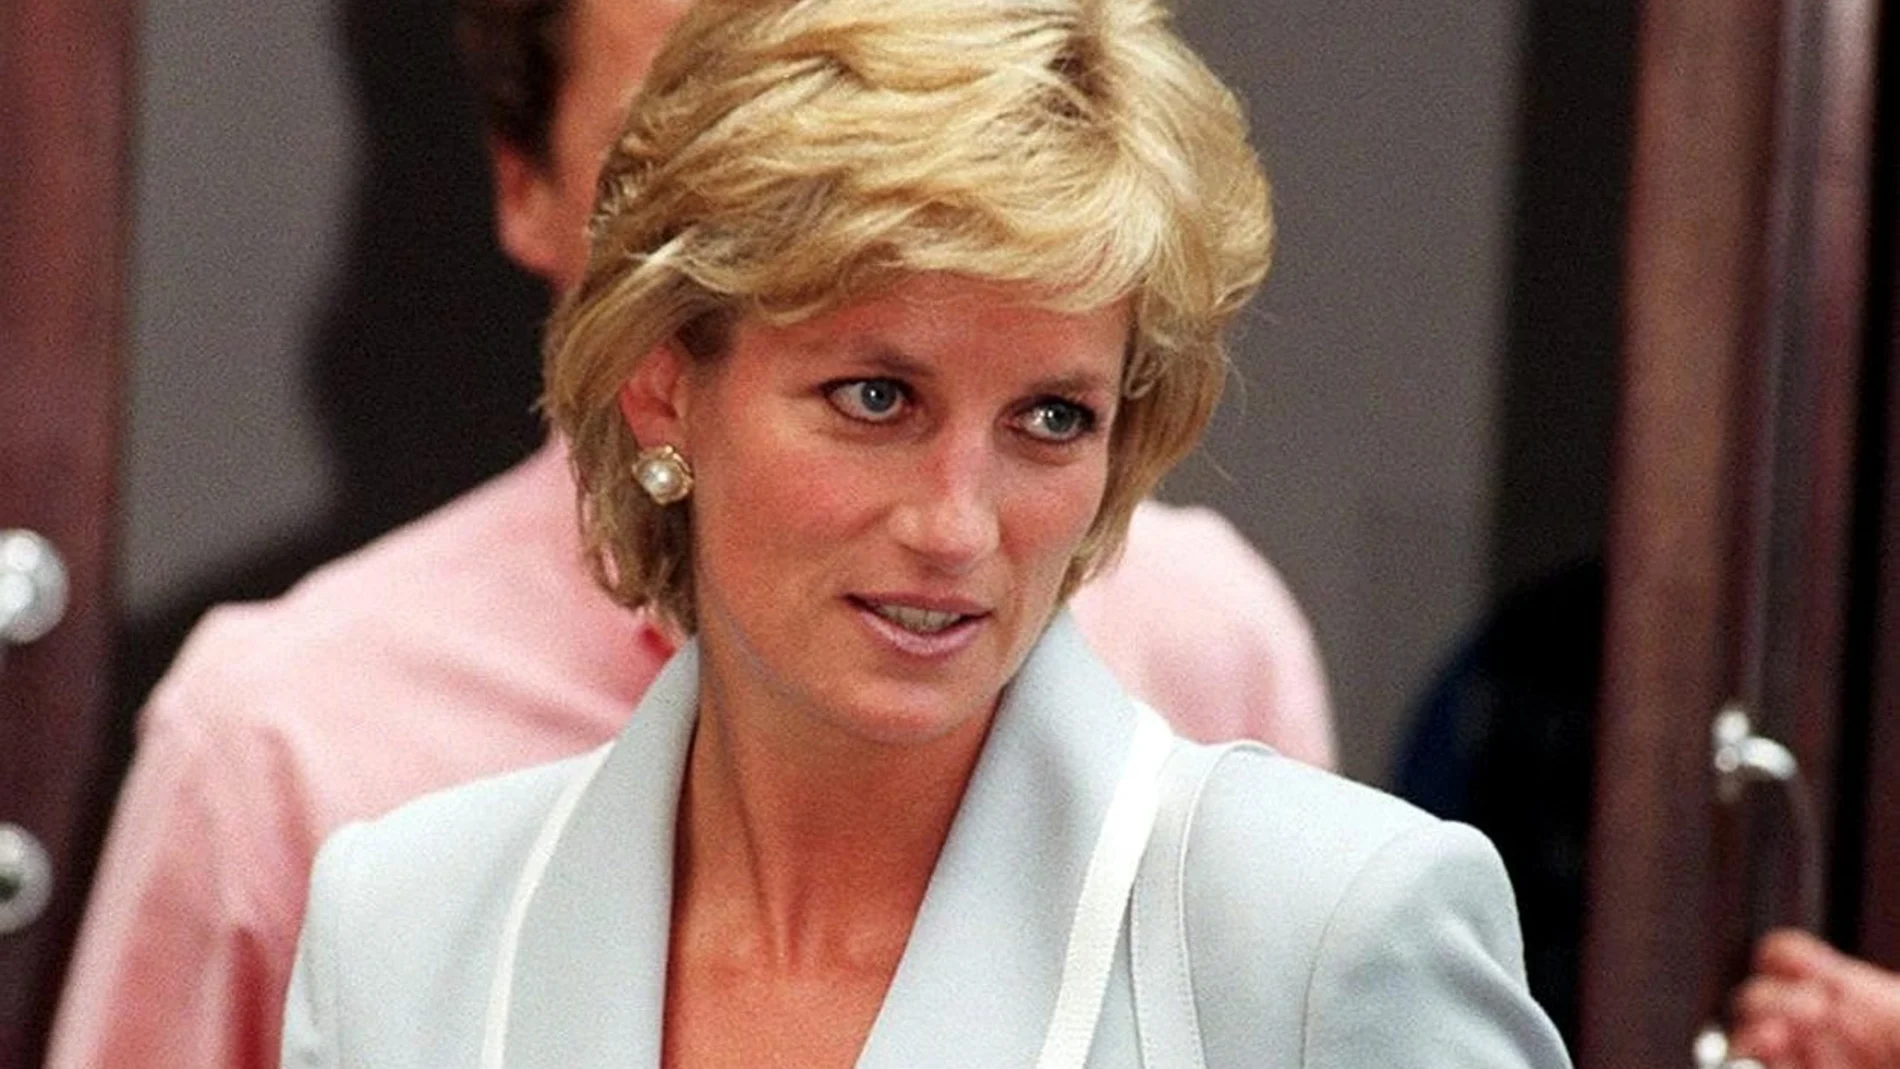 epa000367150 (FILE) A file photo dated 28 August 1996 of Diana, Princess of Wales, wearing her diamond and sapphire engagement ring and wedding ring, as she leaves the studios of the English National Ballet. The Prince of Wales and Camilla Parker Bowles are to finally marry, ending years of speculation over their relationship. At last, Charles's long-time companion is to become a member of the royal family, known as Her Royal Highness, but not Queen Camilla. Following the historic nuptials in a civil ceremony at Windsor Castle, she will become the Duchess of Cornwall. EFE/epa/PA UK AND IRELAND OUT